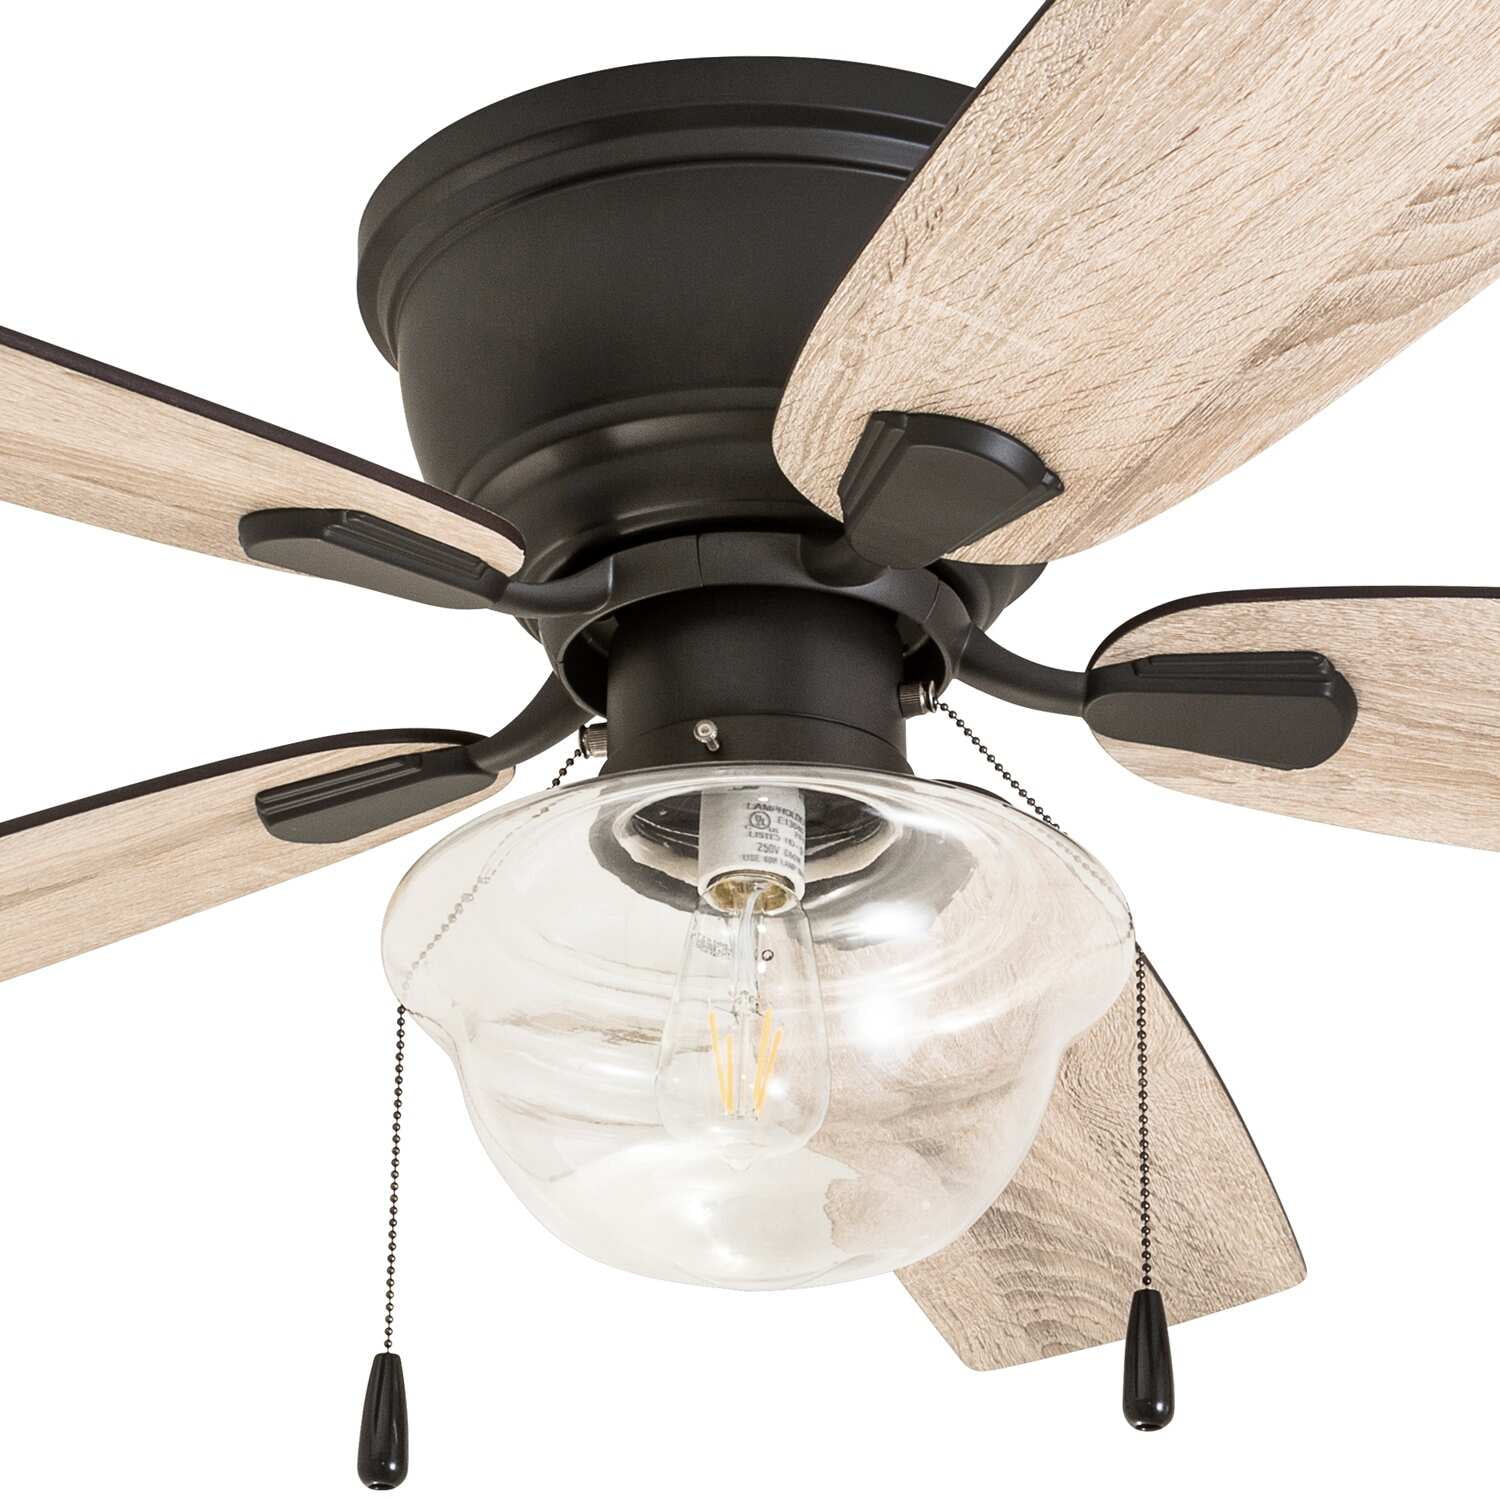 Details about   The Gray Barn Wilton 60-inch Coastal Indoor LED Ceiling Fan With Remote Control 